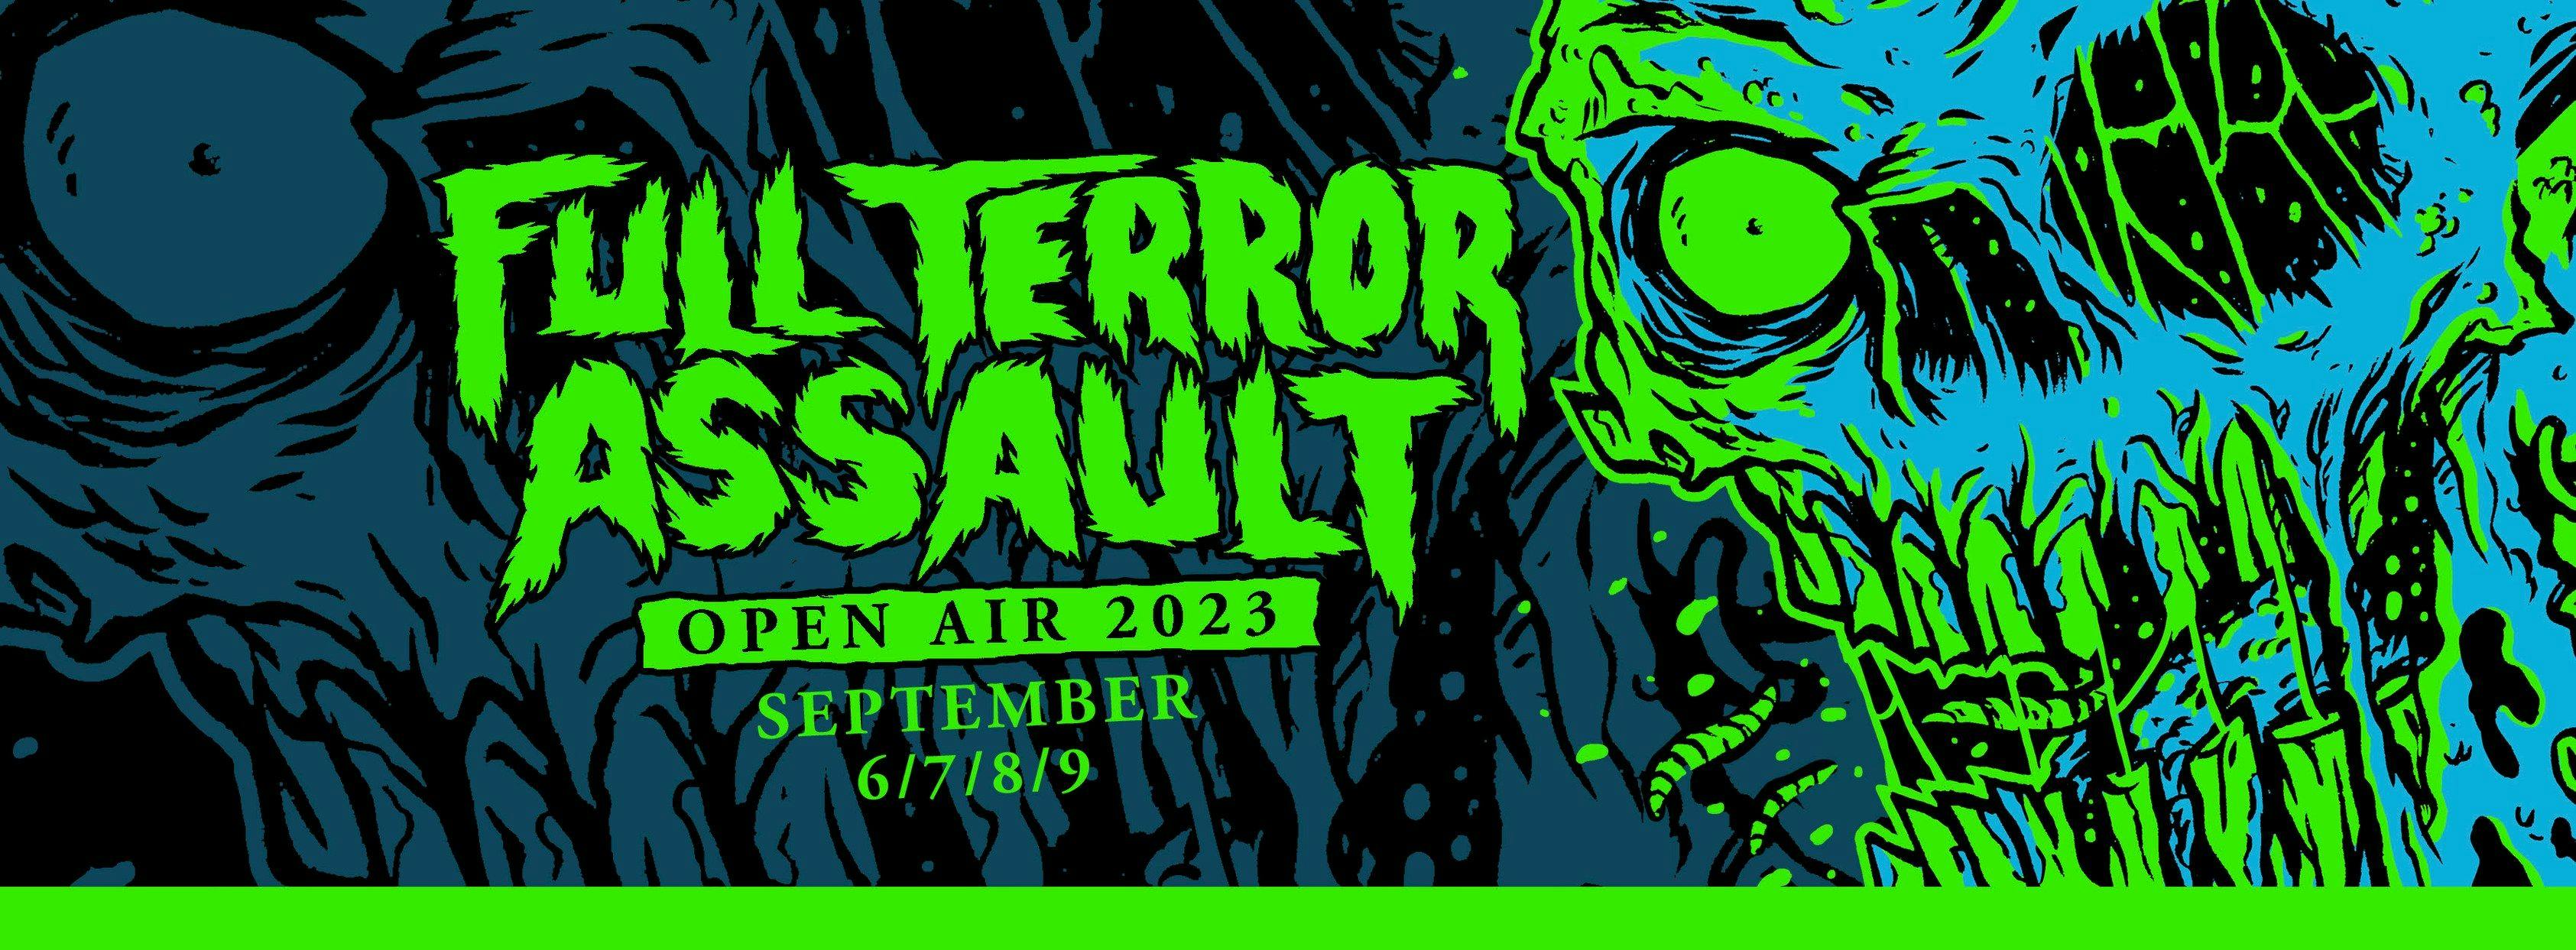 Rockin' in the USA: The Best Rock Music Festivals You Can't Miss in 2023 - Full terror assault festival RatePunk